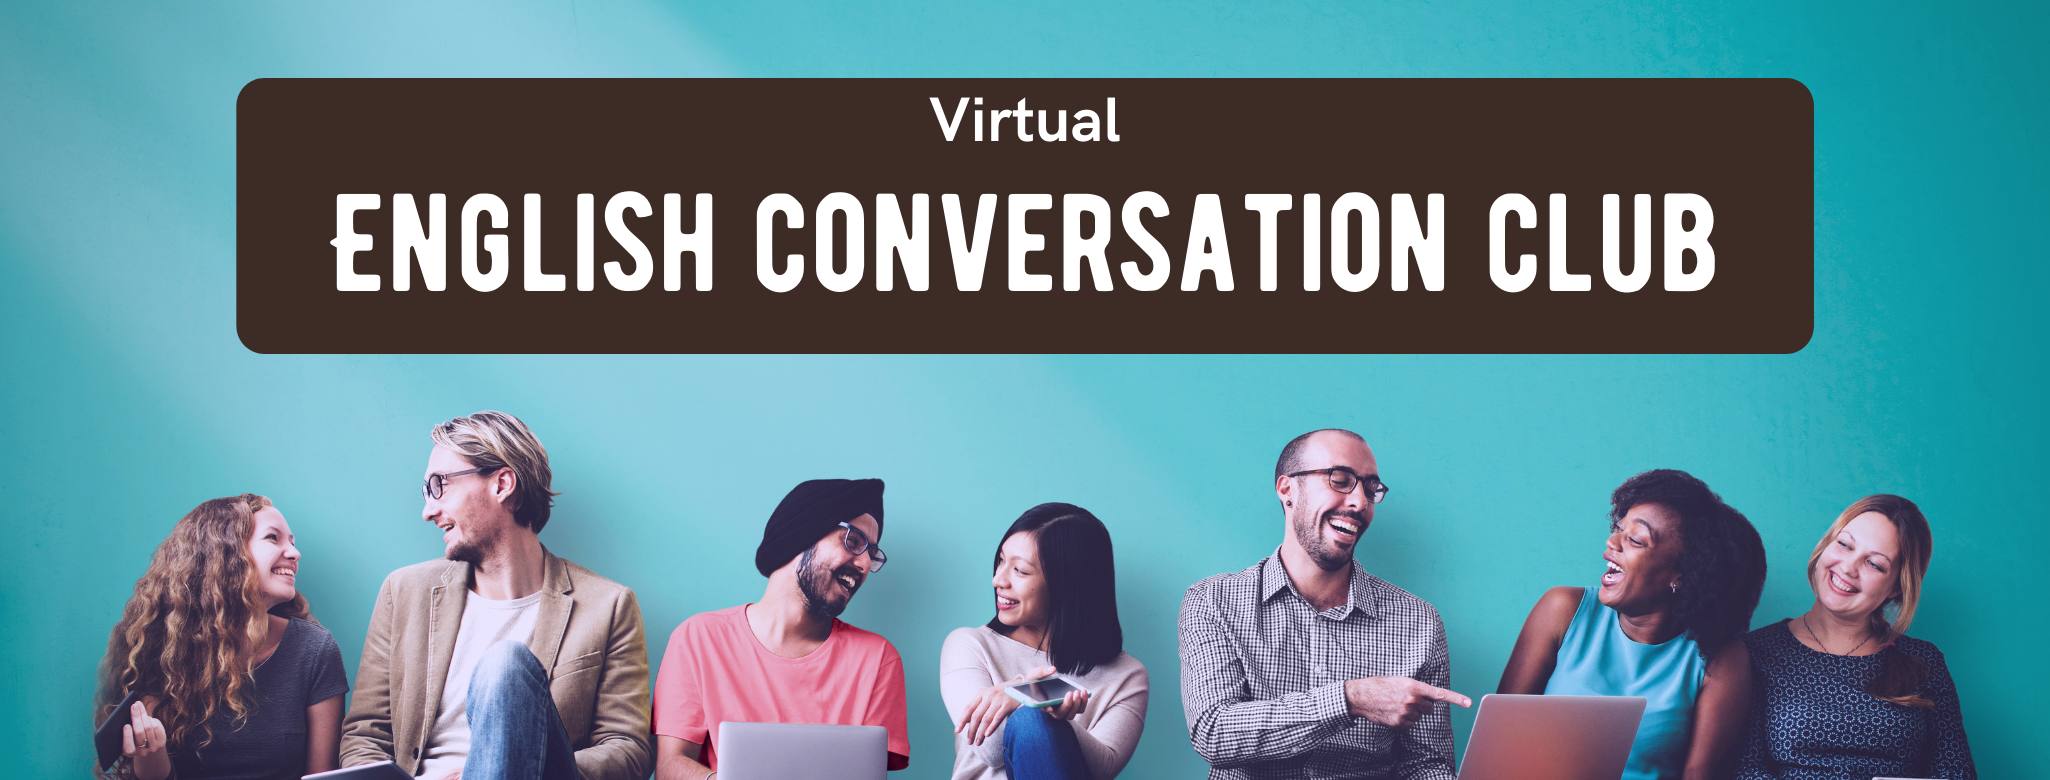 English Conversation Club logo above a multicultural group of people sitting against a teal wall